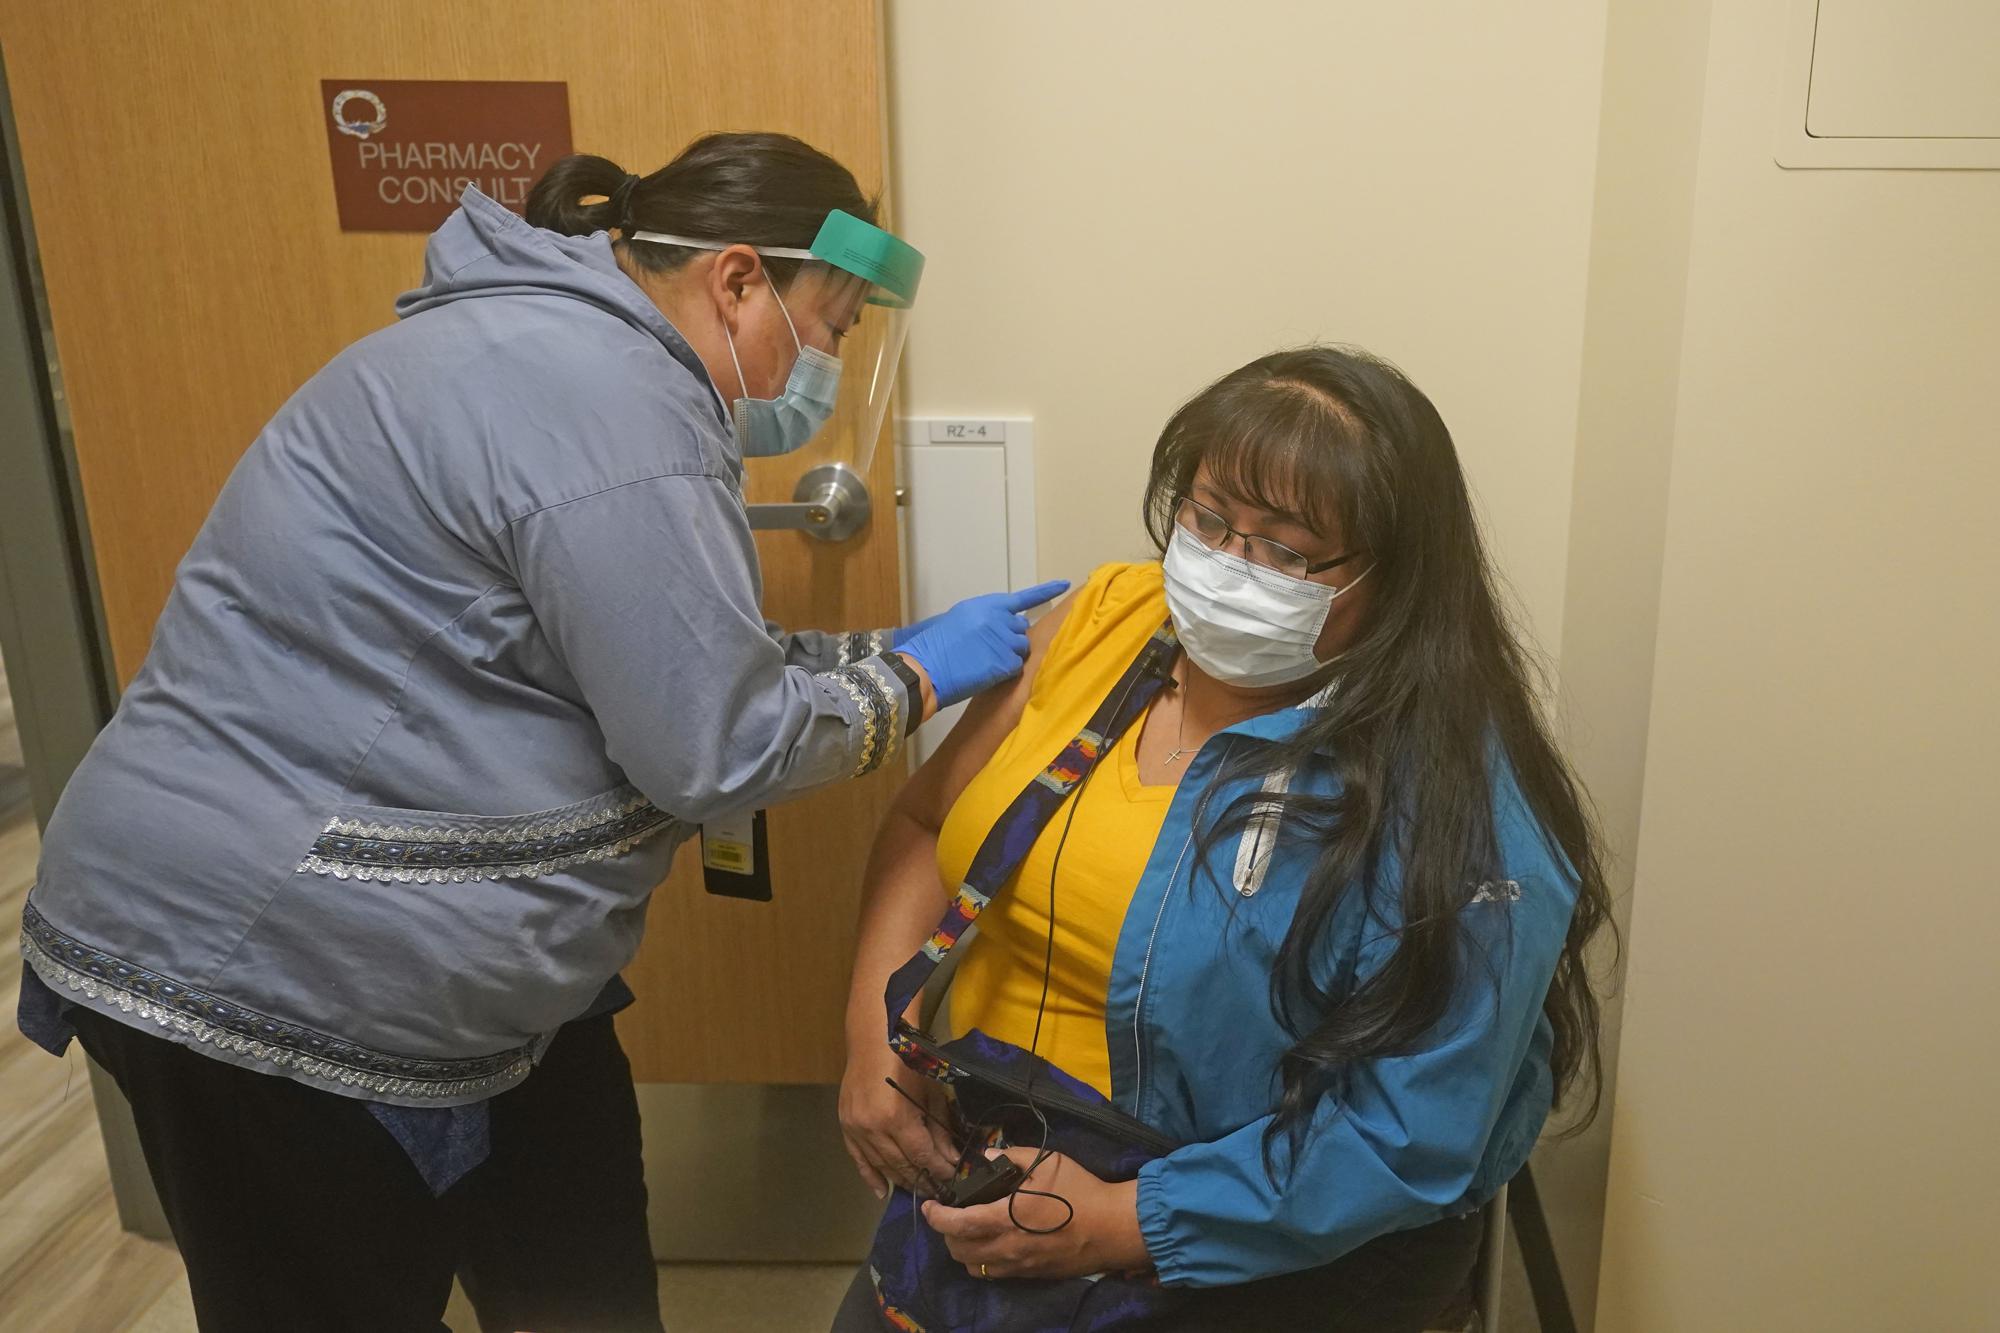 Samantha Ervin, left, a pharmacist at the Upper Tanana Health Center, administers the second COVID-19 vaccine shot to Maggie Roach Thursday, Sept. 23, 2021, in Tok, Alaska. Roach was at first hesitant to get the vaccine but changed her mind after contracting COVID-19 and nearly dying from it last summer. She now encourages other to consider getting vaccinated if they haven't. That's what she and her husband did. (AP Photo/Rick Bowmer)